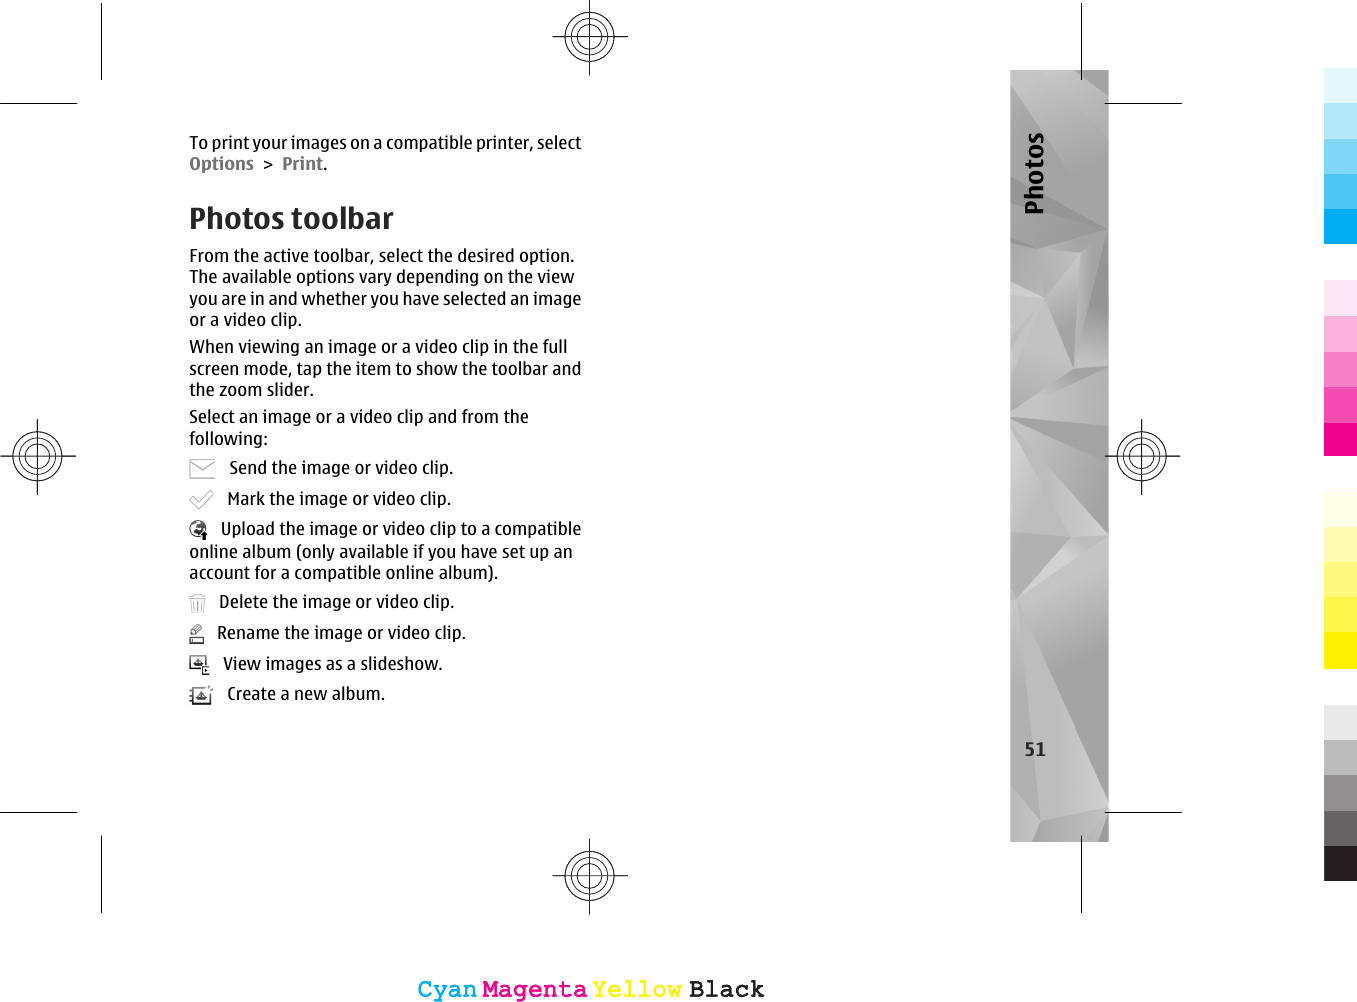 To print your images on a compatible printer, selectOptions &gt; Print.Photos toolbarFrom the active toolbar, select the desired option.The available options vary depending on the viewyou are in and whether you have selected an imageor a video clip.When viewing an image or a video clip in the fullscreen mode, tap the item to show the toolbar andthe zoom slider.Select an image or a video clip and from thefollowing:   Send the image or video clip.   Mark the image or video clip.   Upload the image or video clip to a compatibleonline album (only available if you have set up anaccount for a compatible online album).   Delete the image or video clip.   Rename the image or video clip.   View images as a slideshow.   Create a new album.51PhotosCyanCyanMagentaMagentaYellowYellowBlackBlackCyanCyanMagentaMagentaYellowYellowBlackBlack